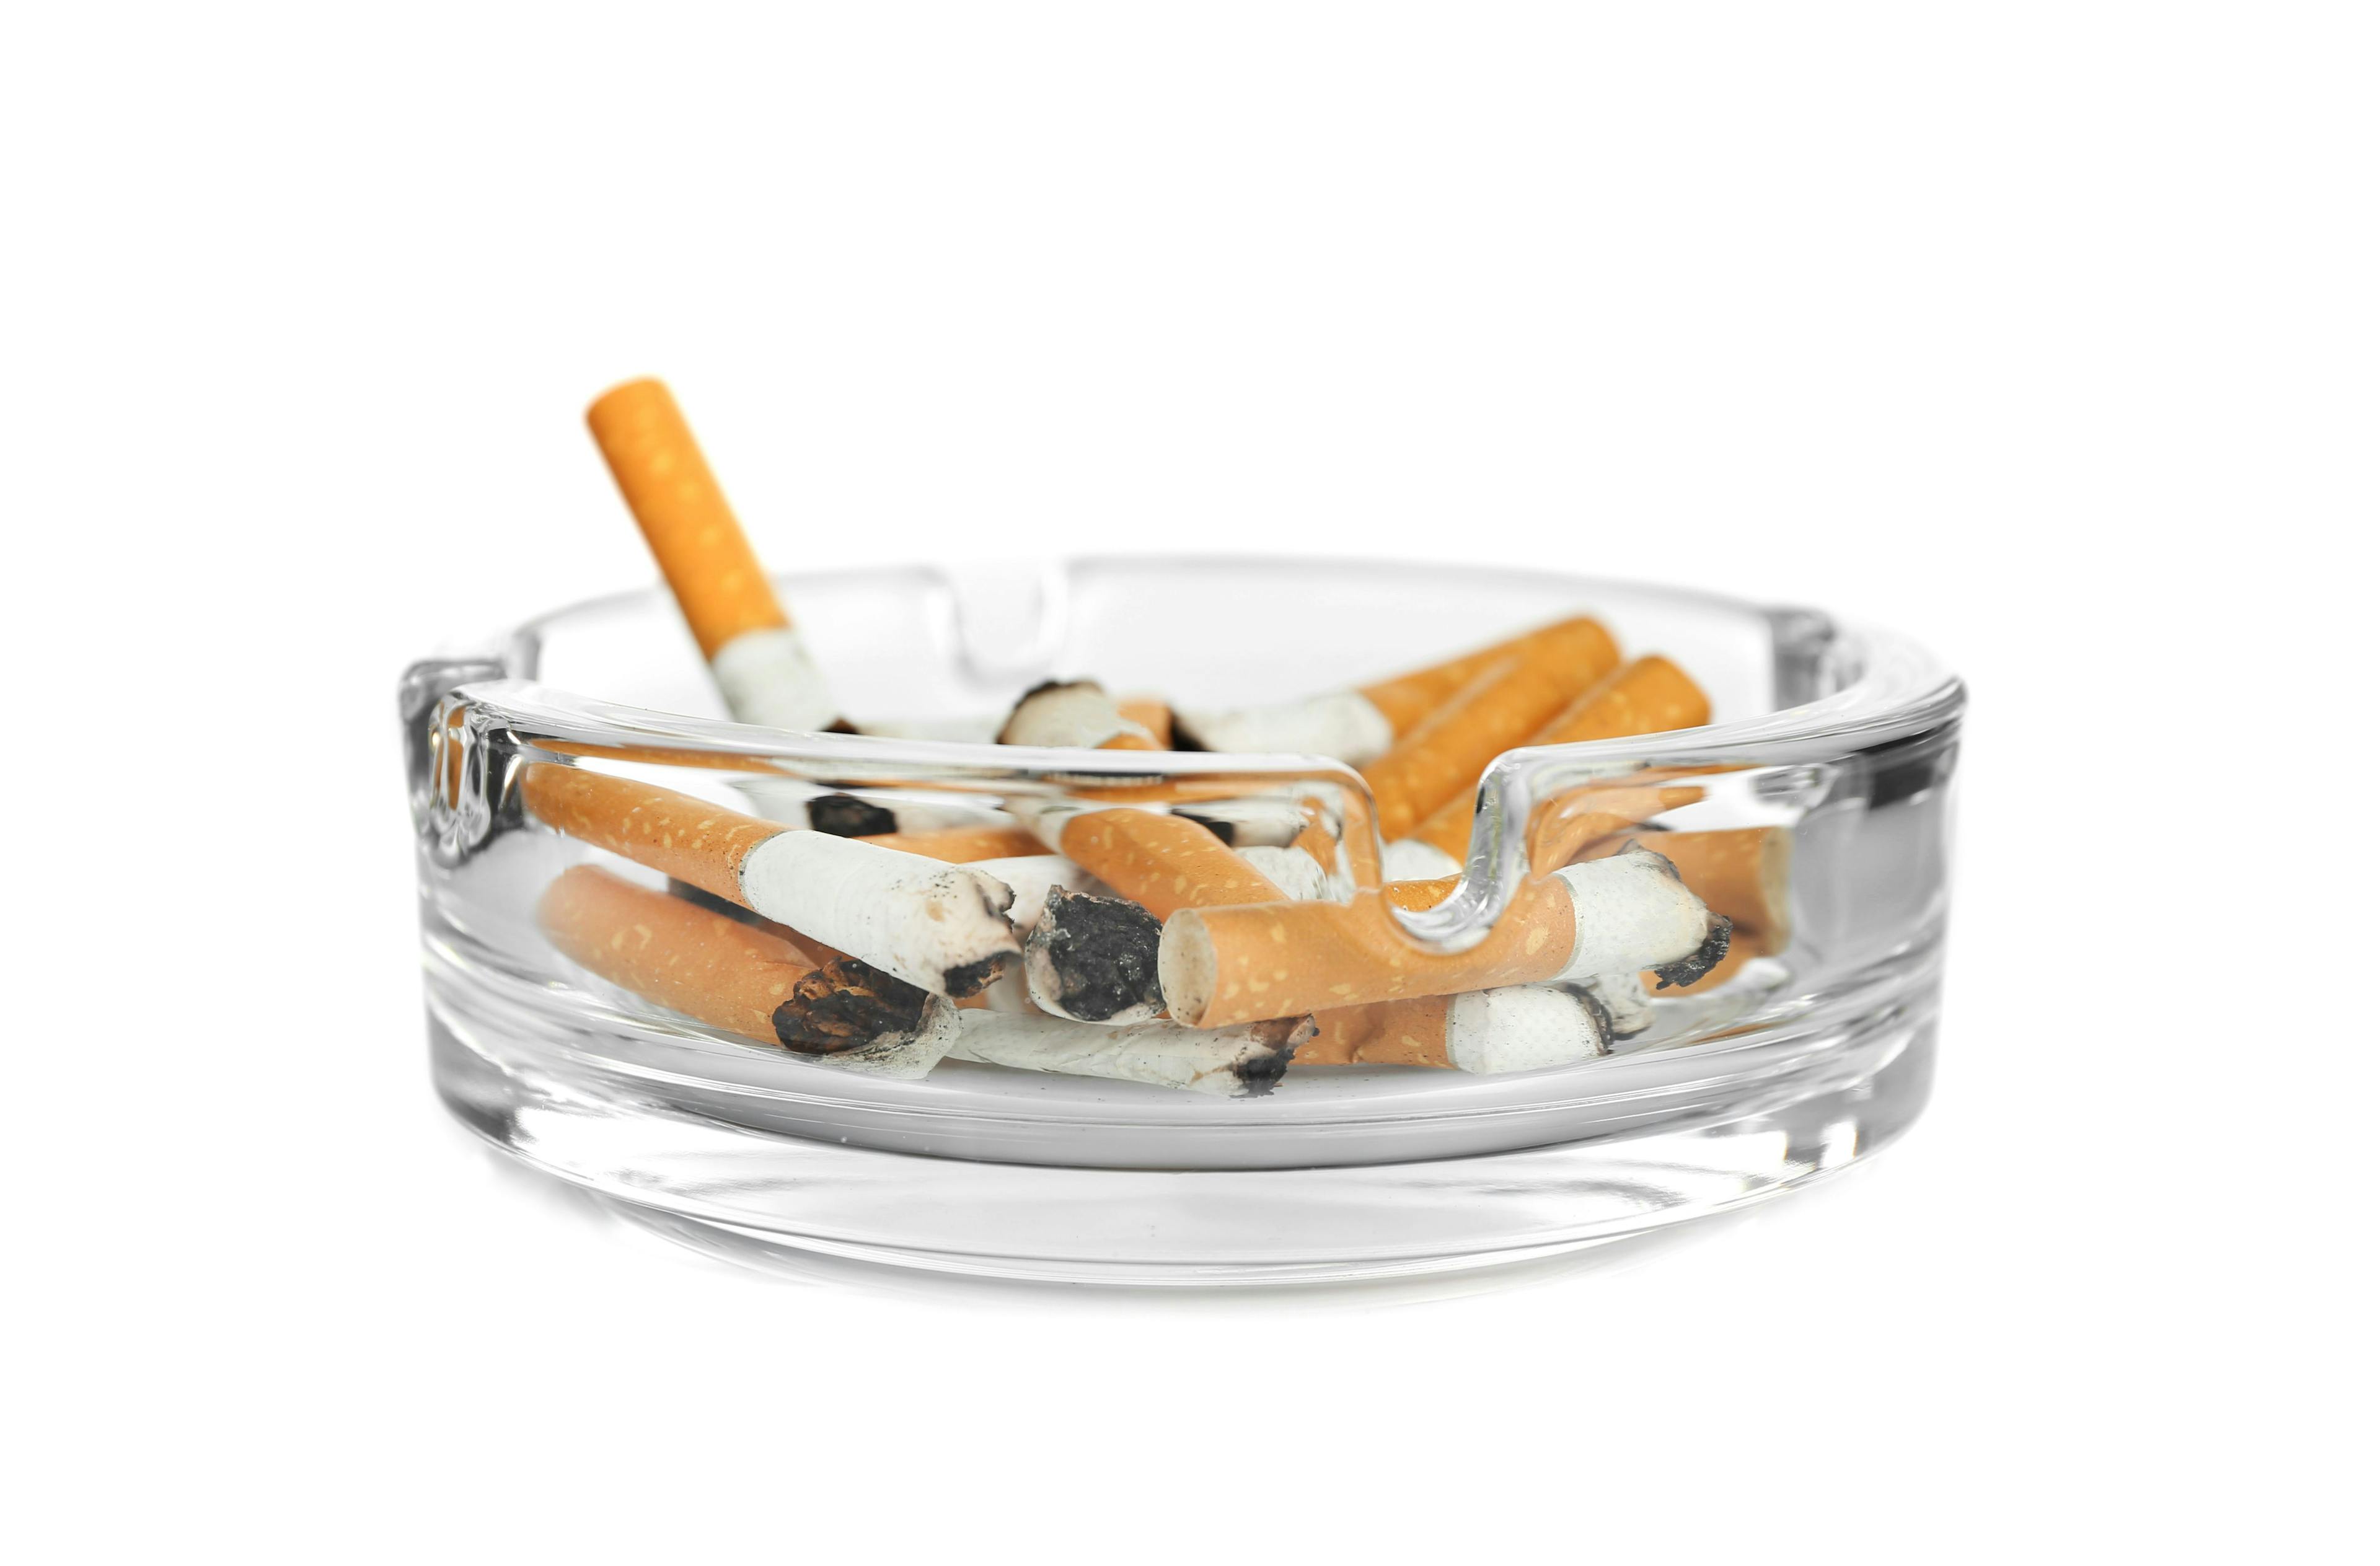 Smoking rates drop among those with depression, substance use